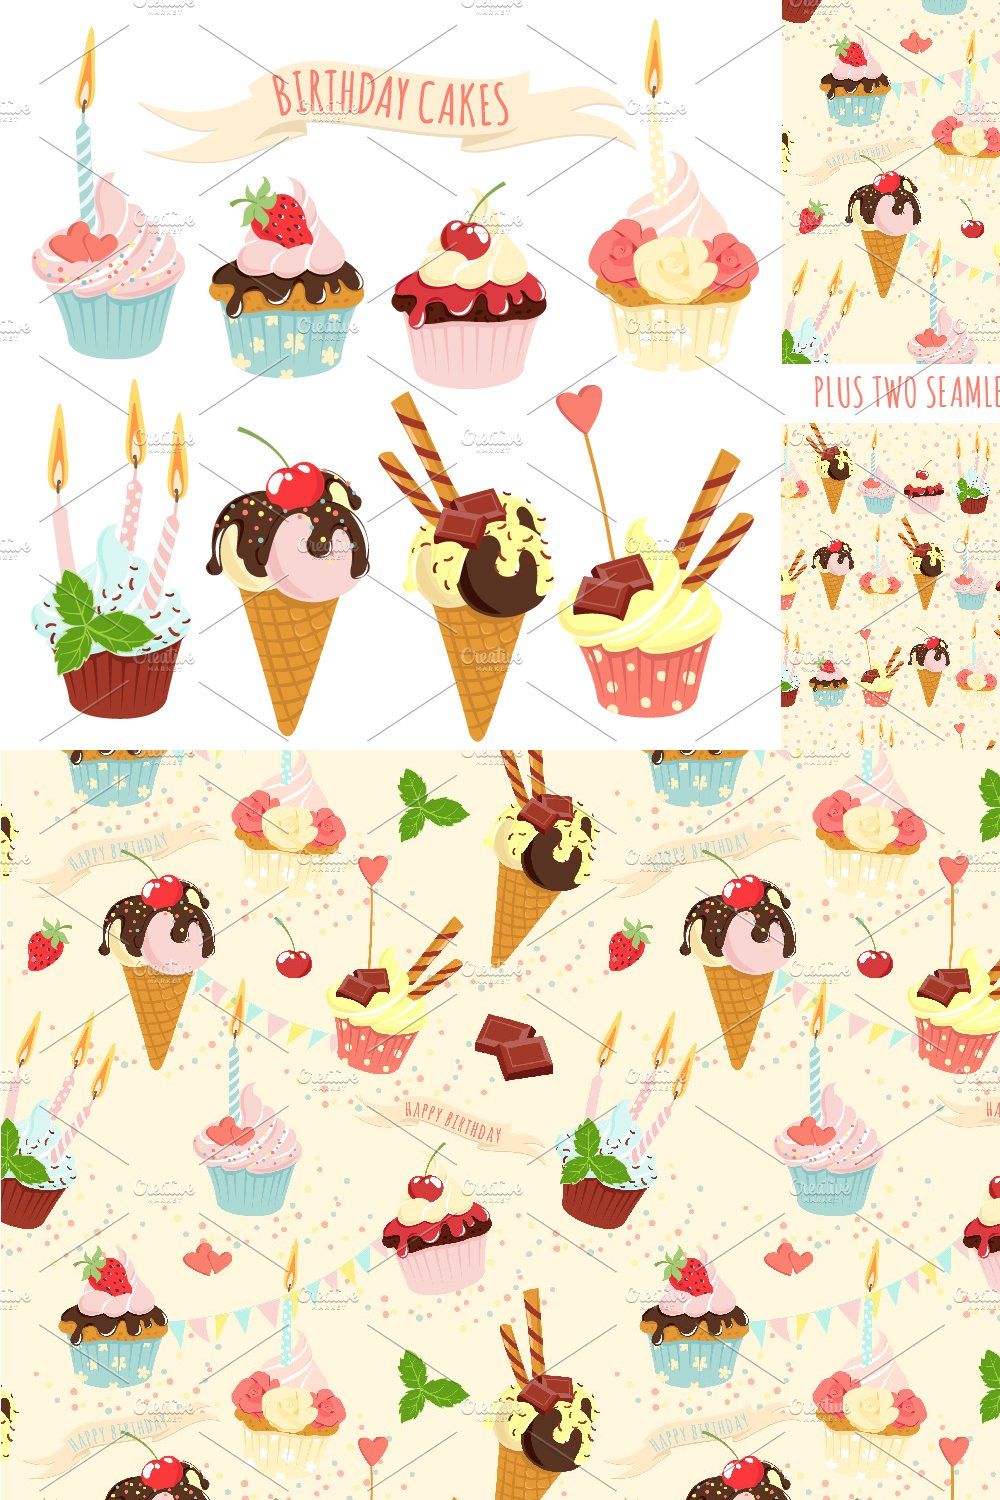 Birthday cupcakes icon set+ patterns pinterest preview image.